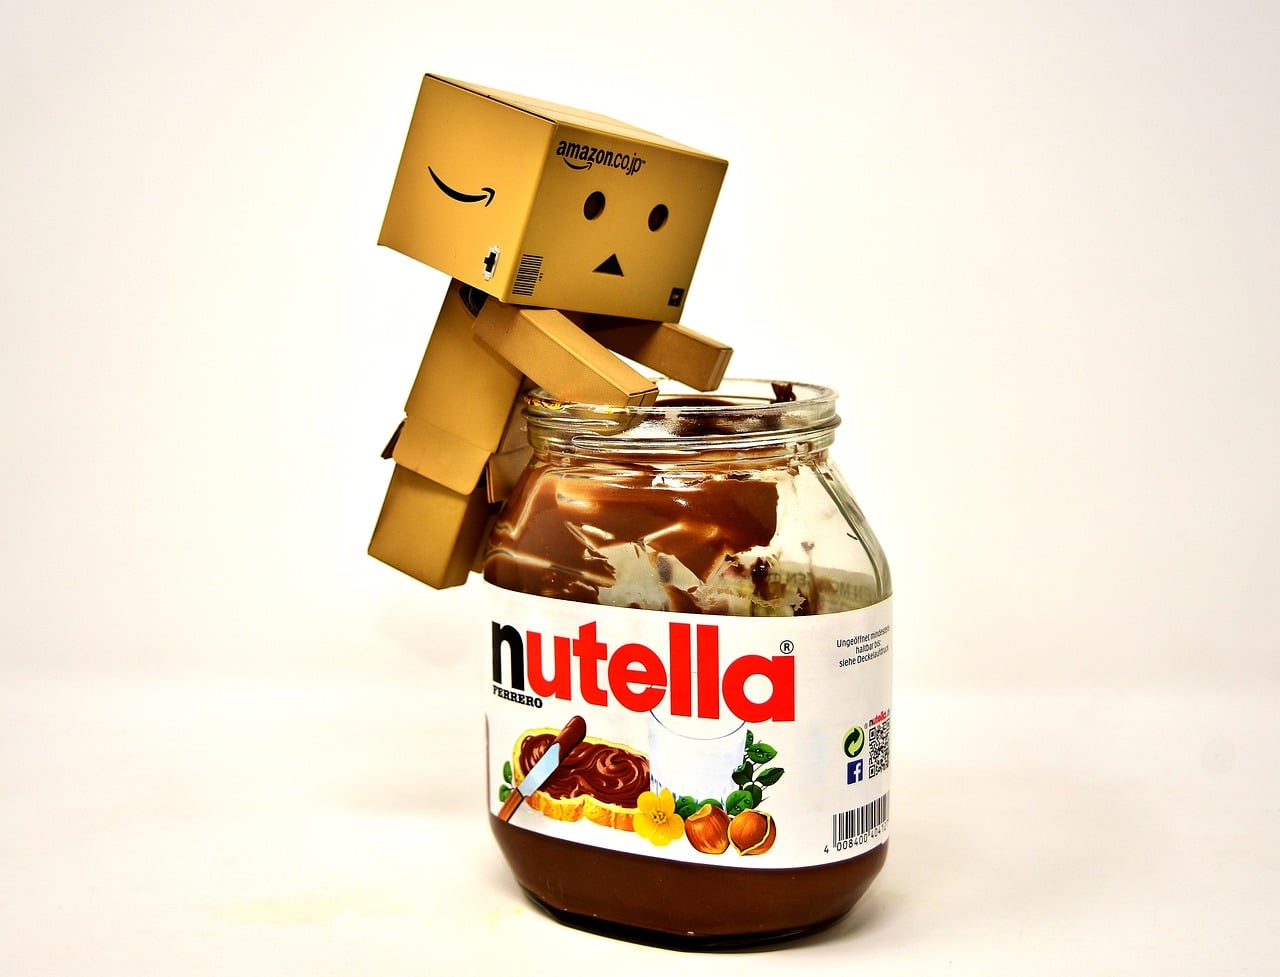 can you swap Nutella for peanut butter when bulking